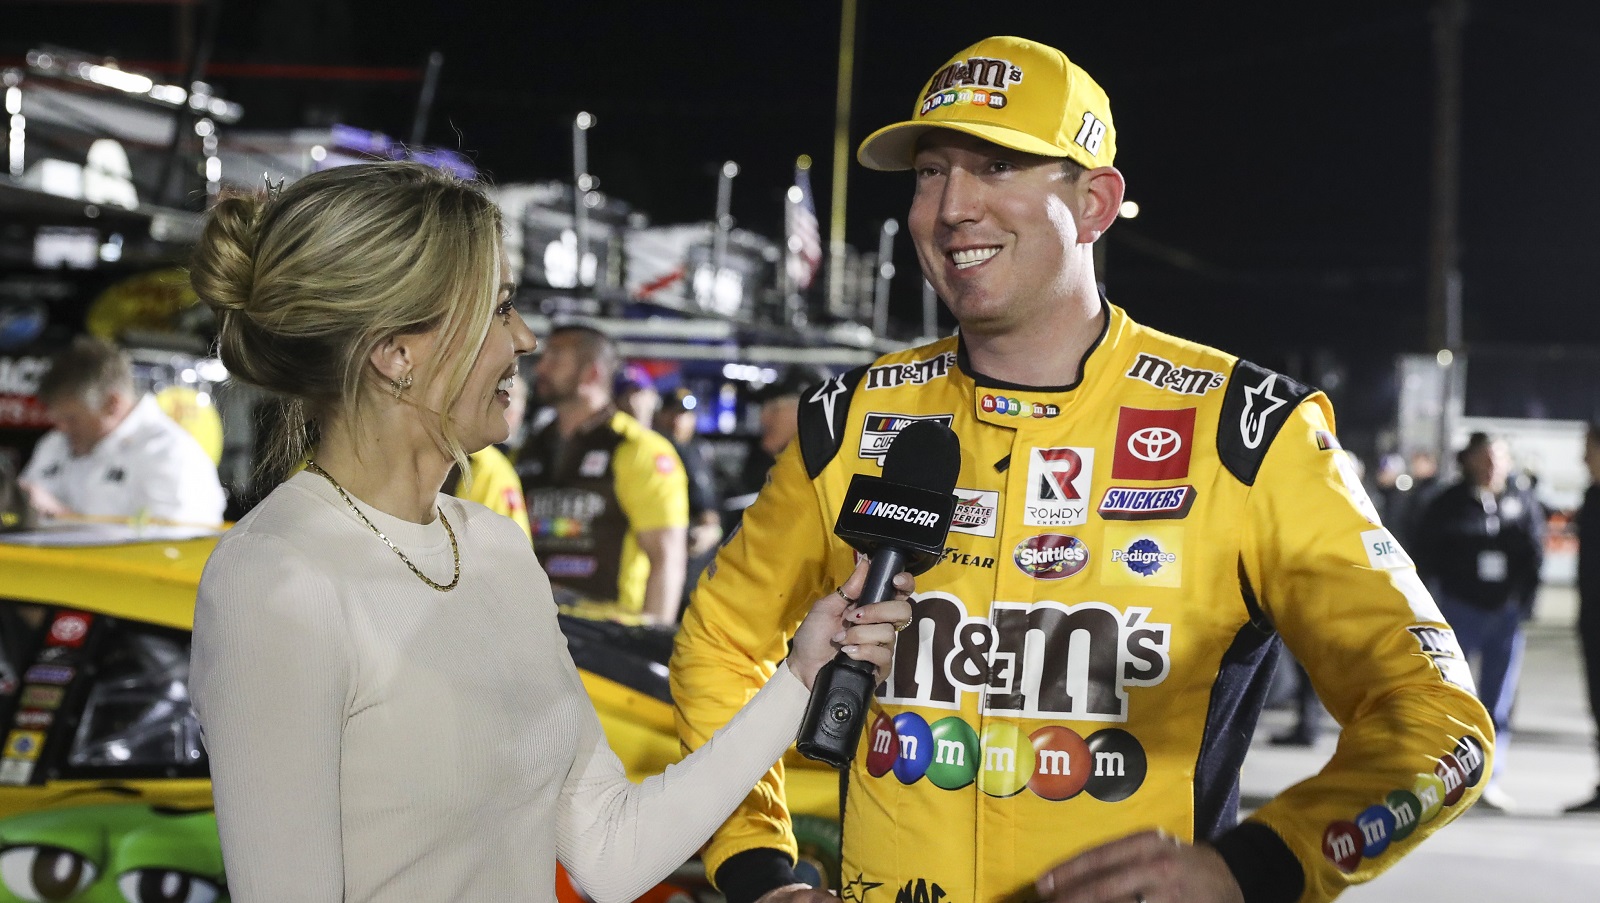 NASCAR told Kyle Busch he was too young to compete the first time he showed up to race at Fontana. | Meg Oliphant/Getty Images